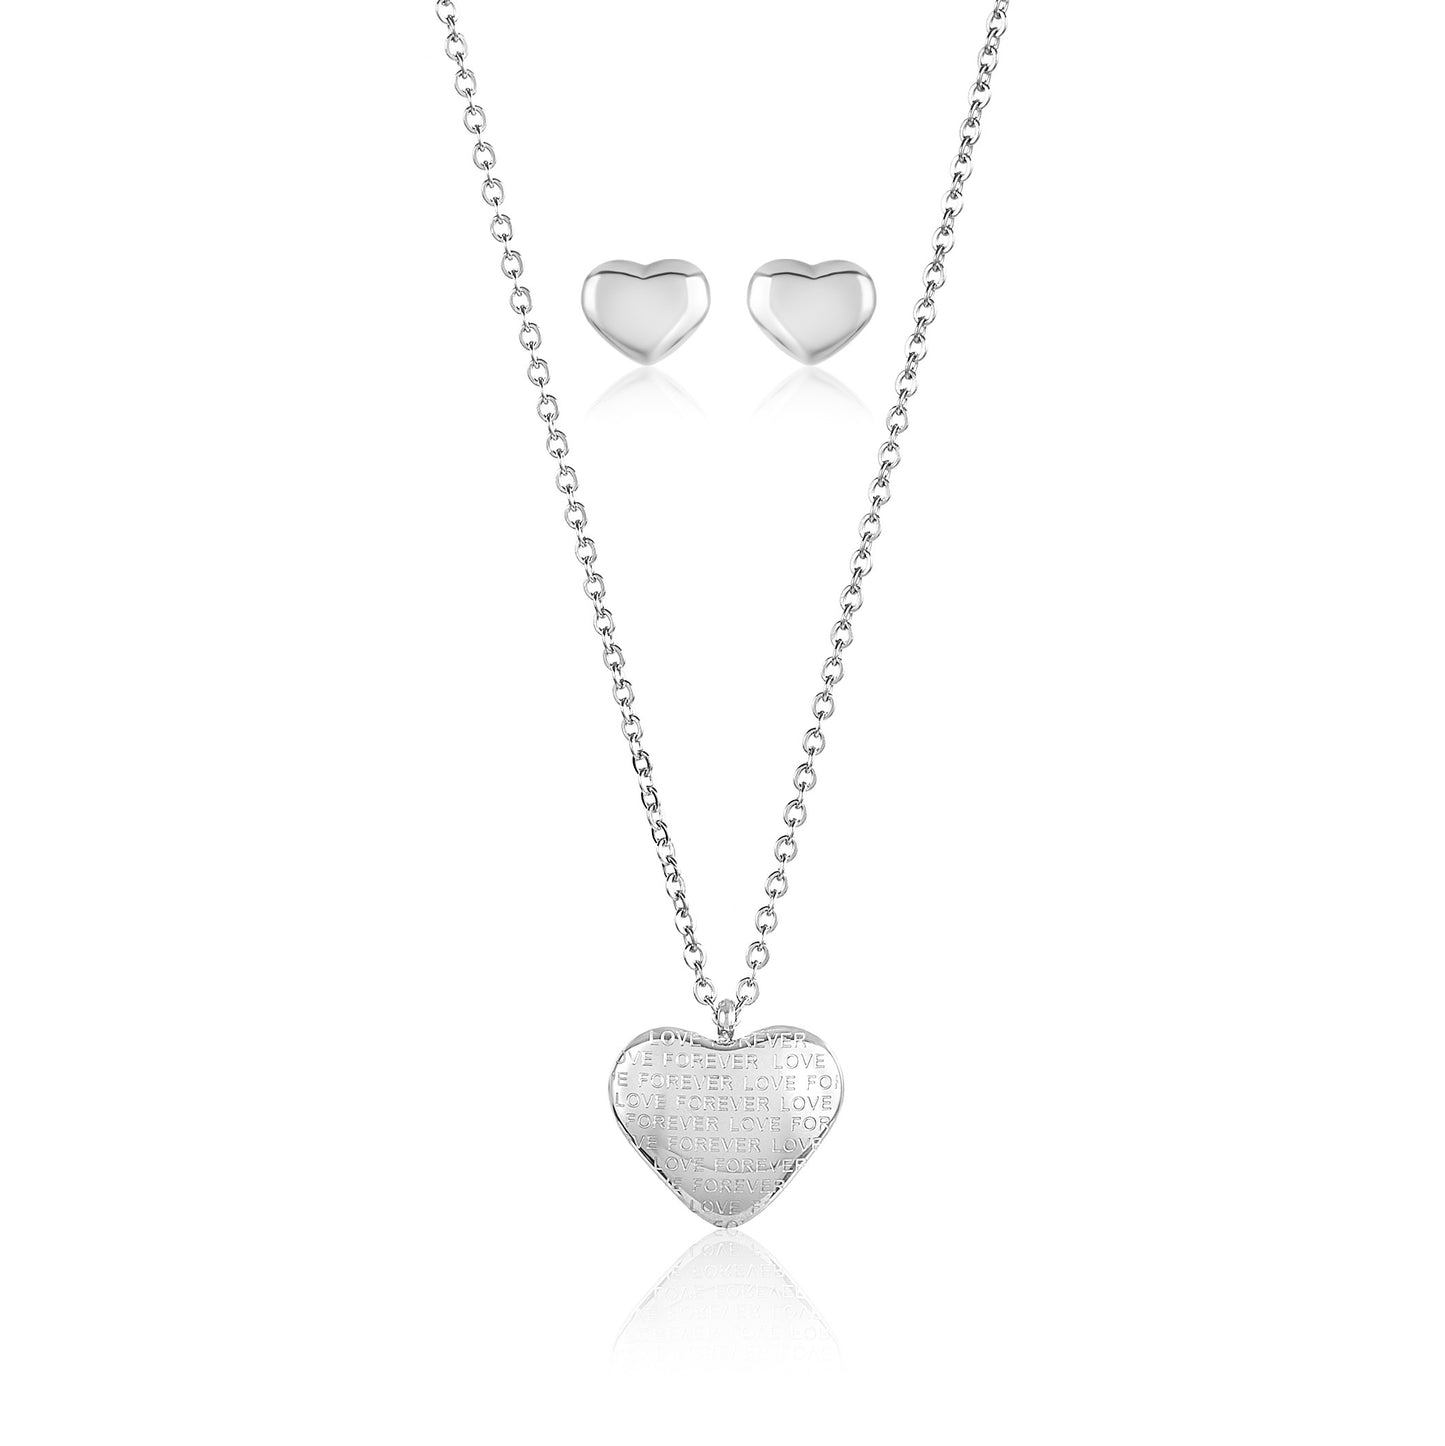 ELYA Engraved Heart Shaped Necklace and Earrings Jewelry Set